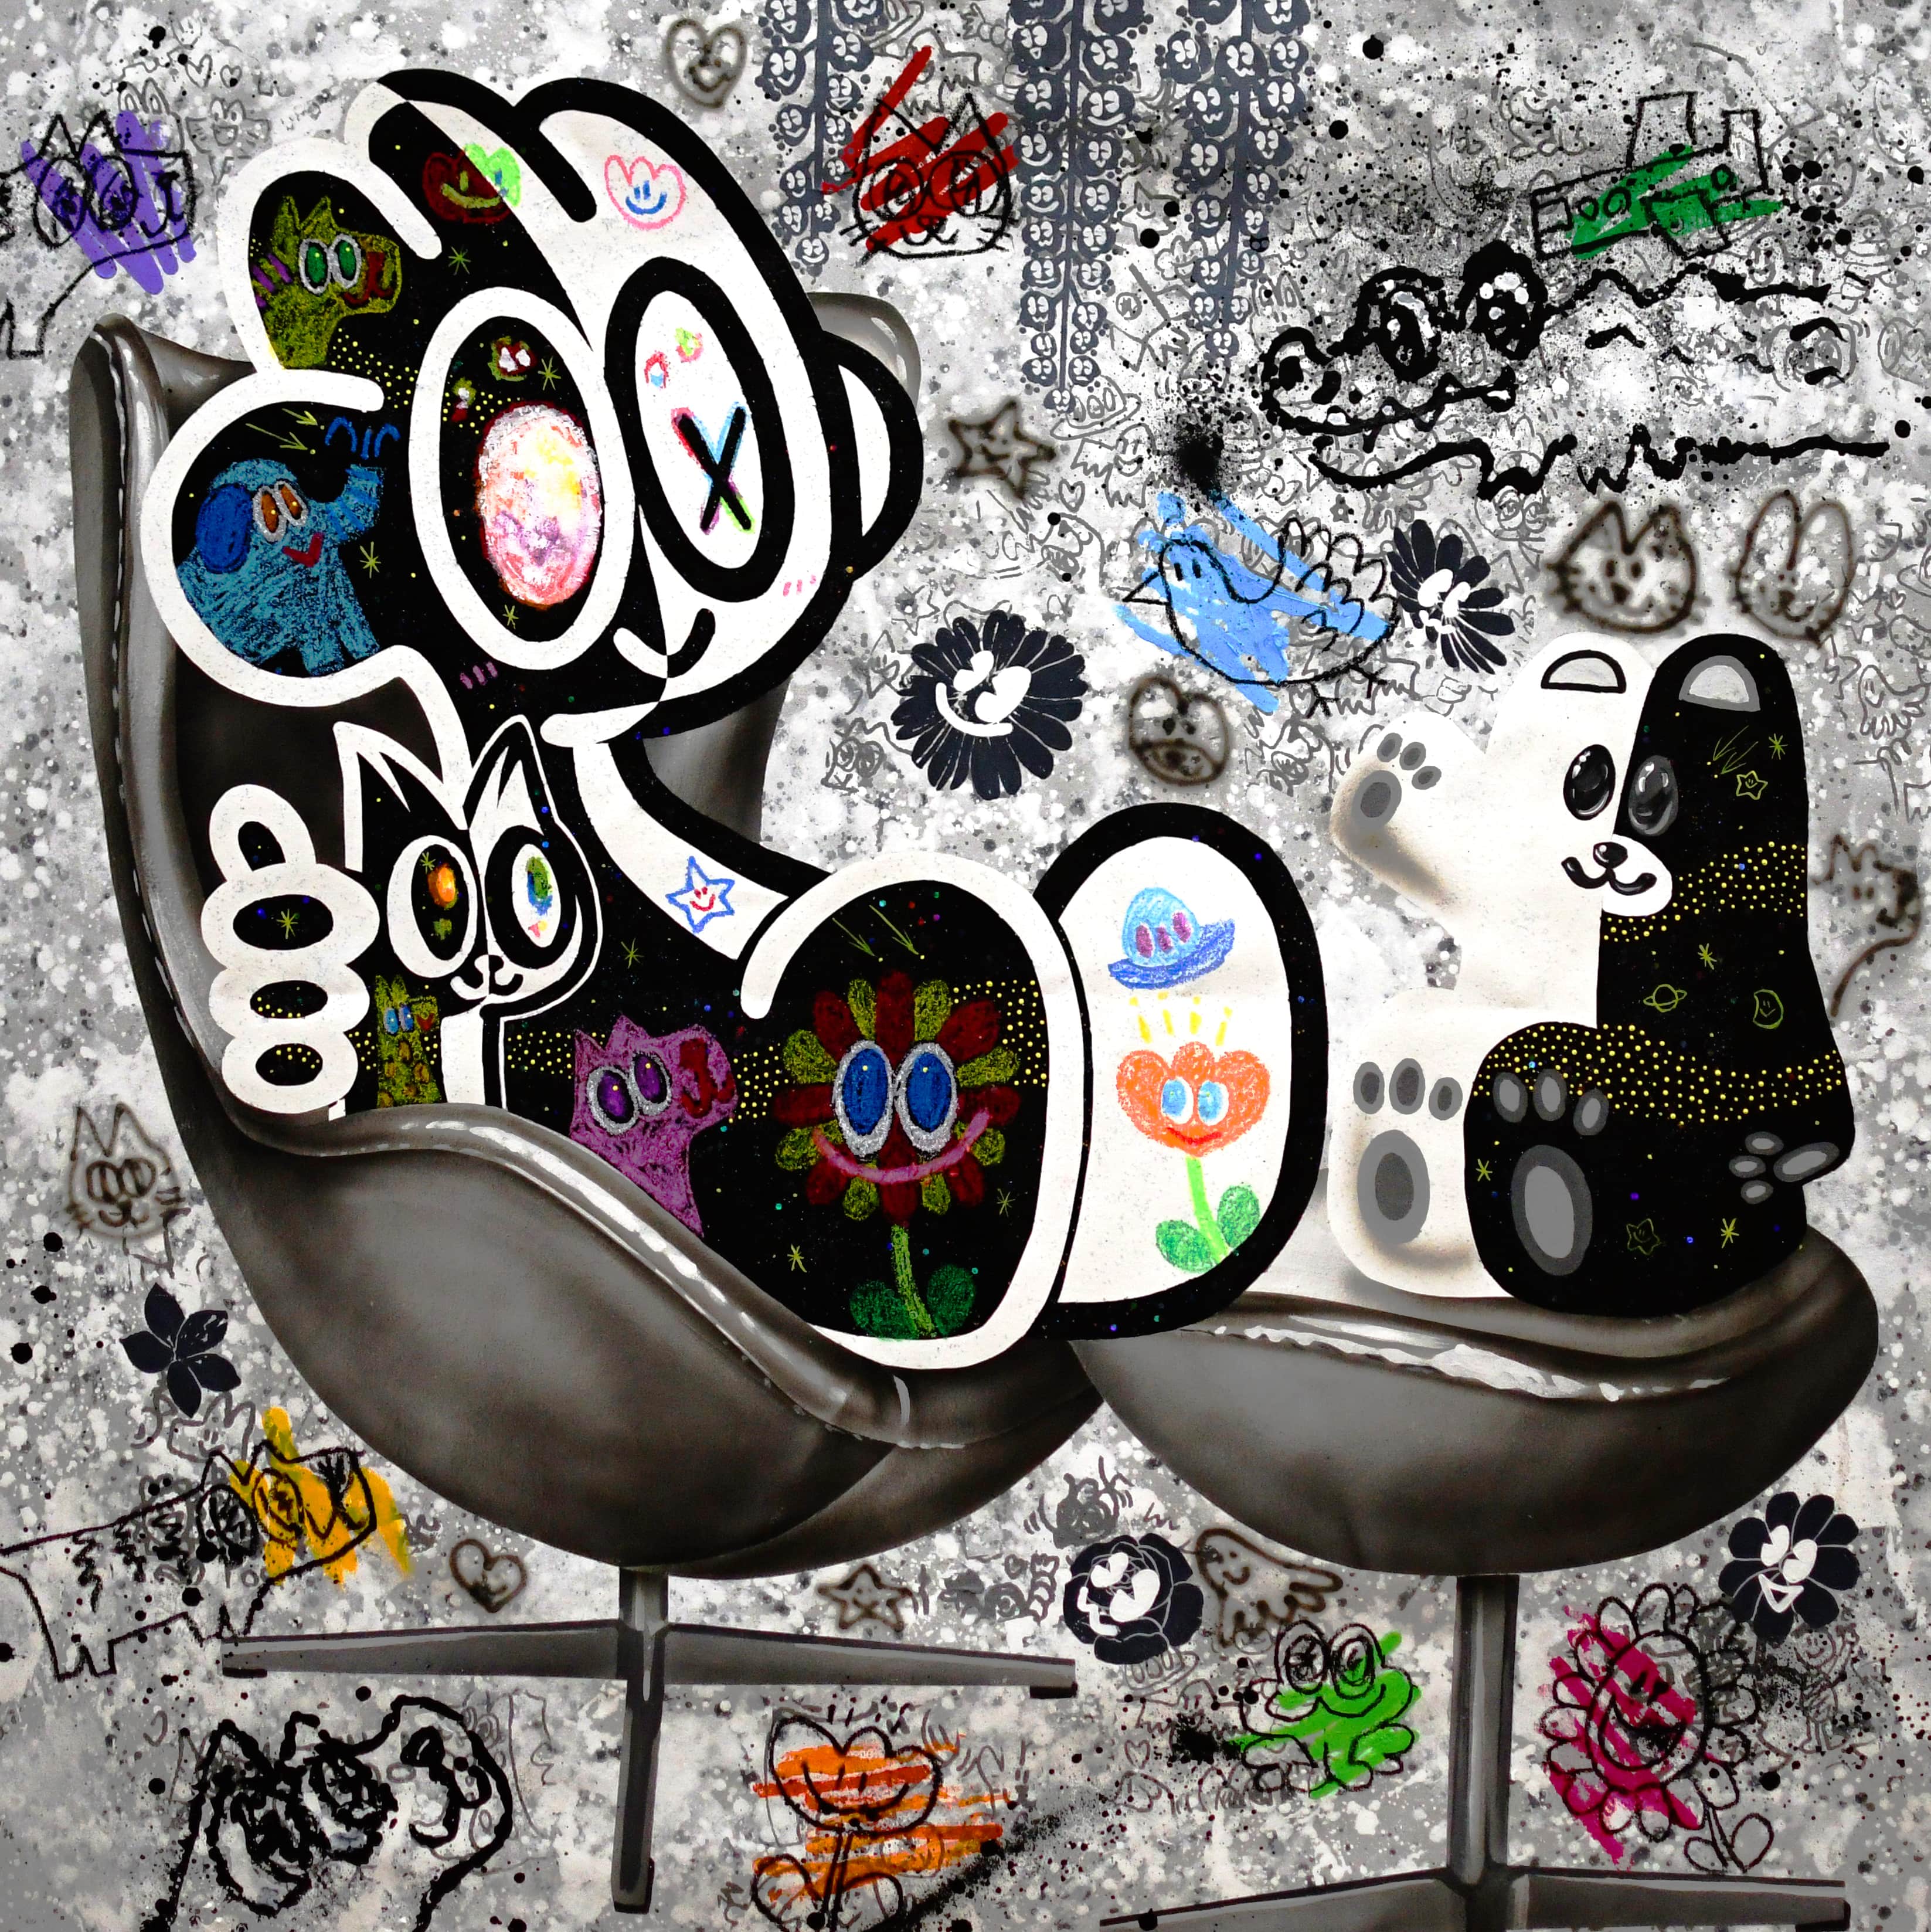 YUM and POM on Chair Mixed Media Painting by YUSUKE TODA